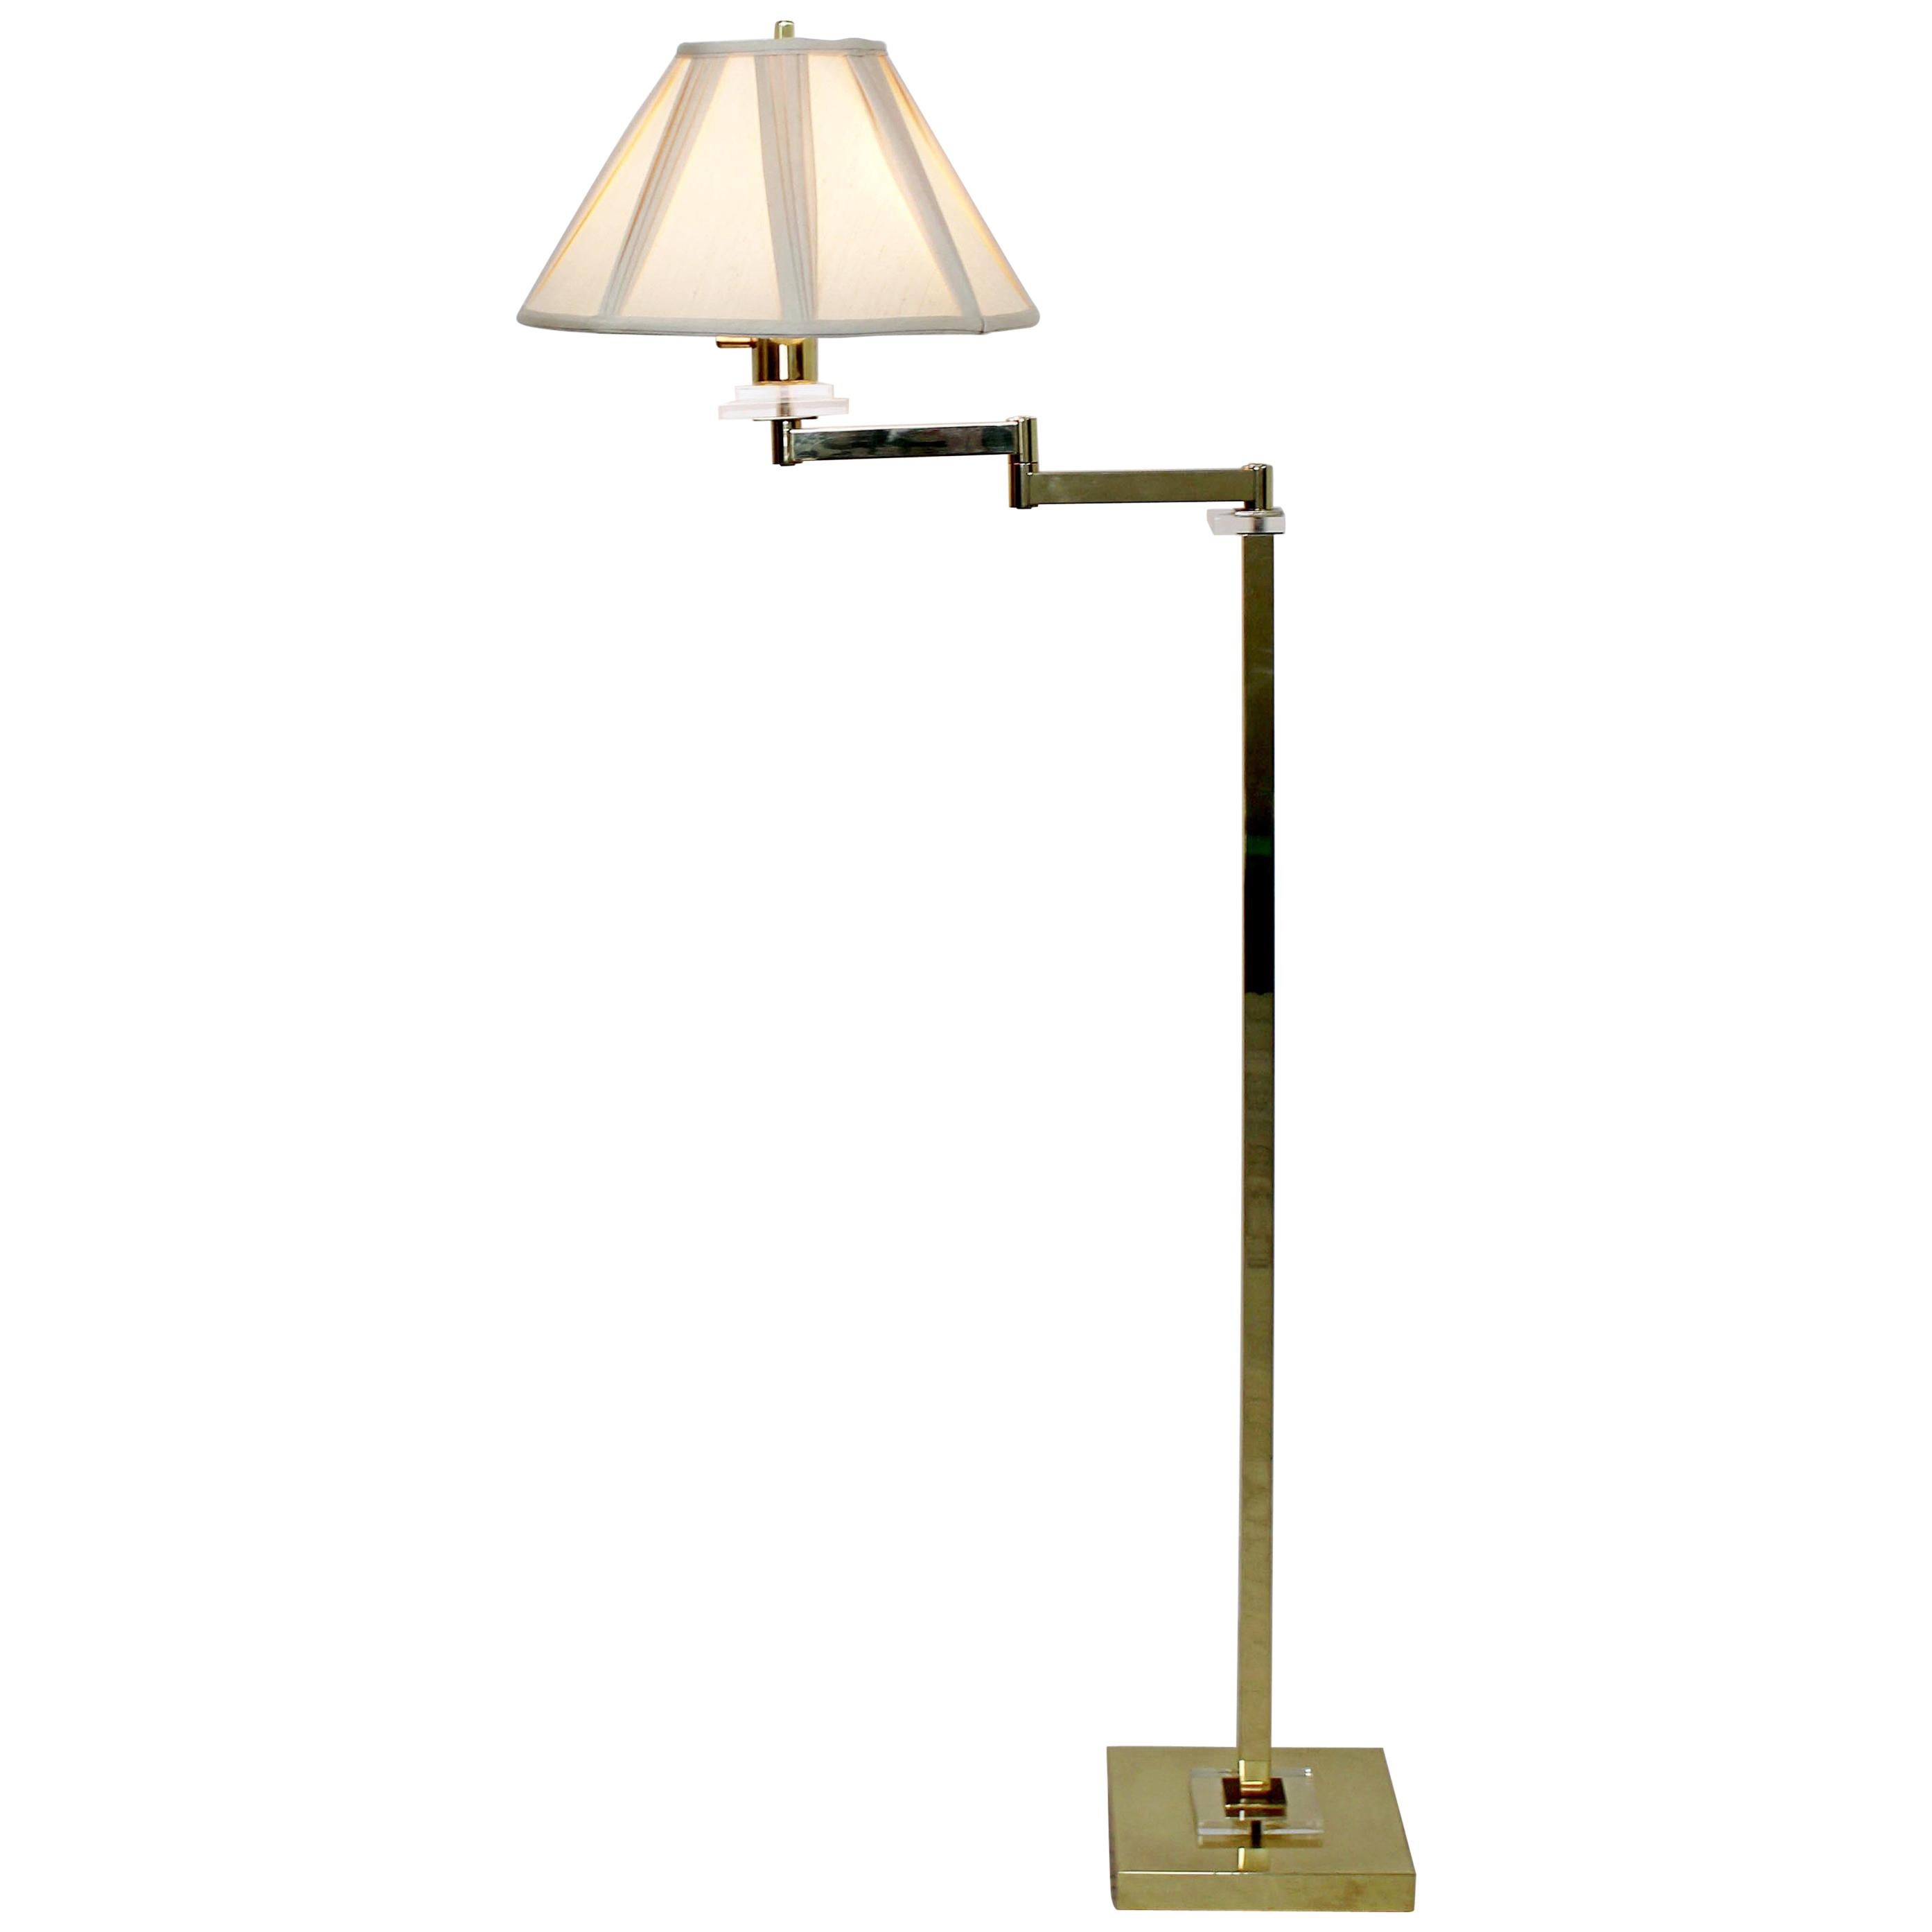 Mid-Century Modern Lucite and Brass Swing Arm Articulating Floor Lamp, 1970s For Sale